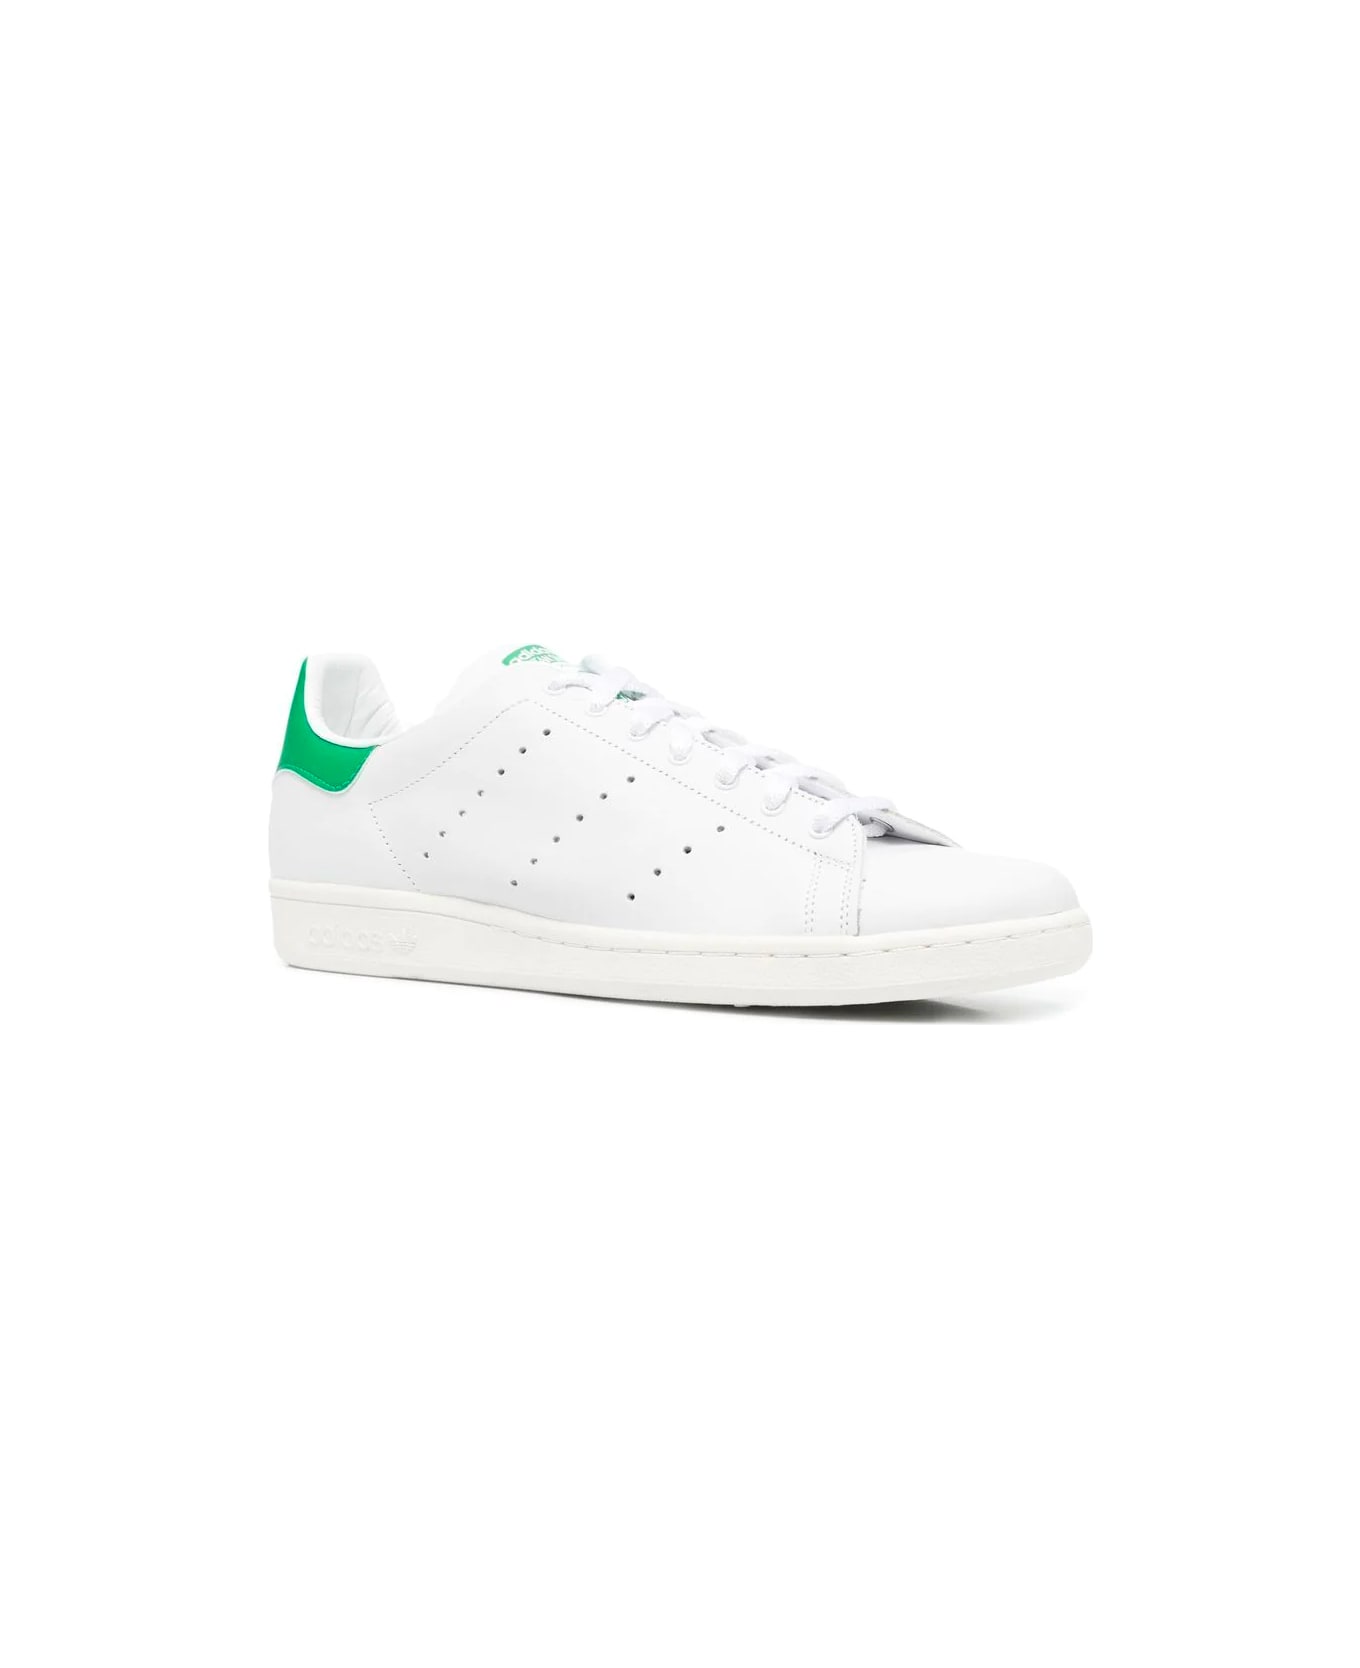 Adidas Stan Smith 80s Sneakers - Ftwwht Ftwwht Green